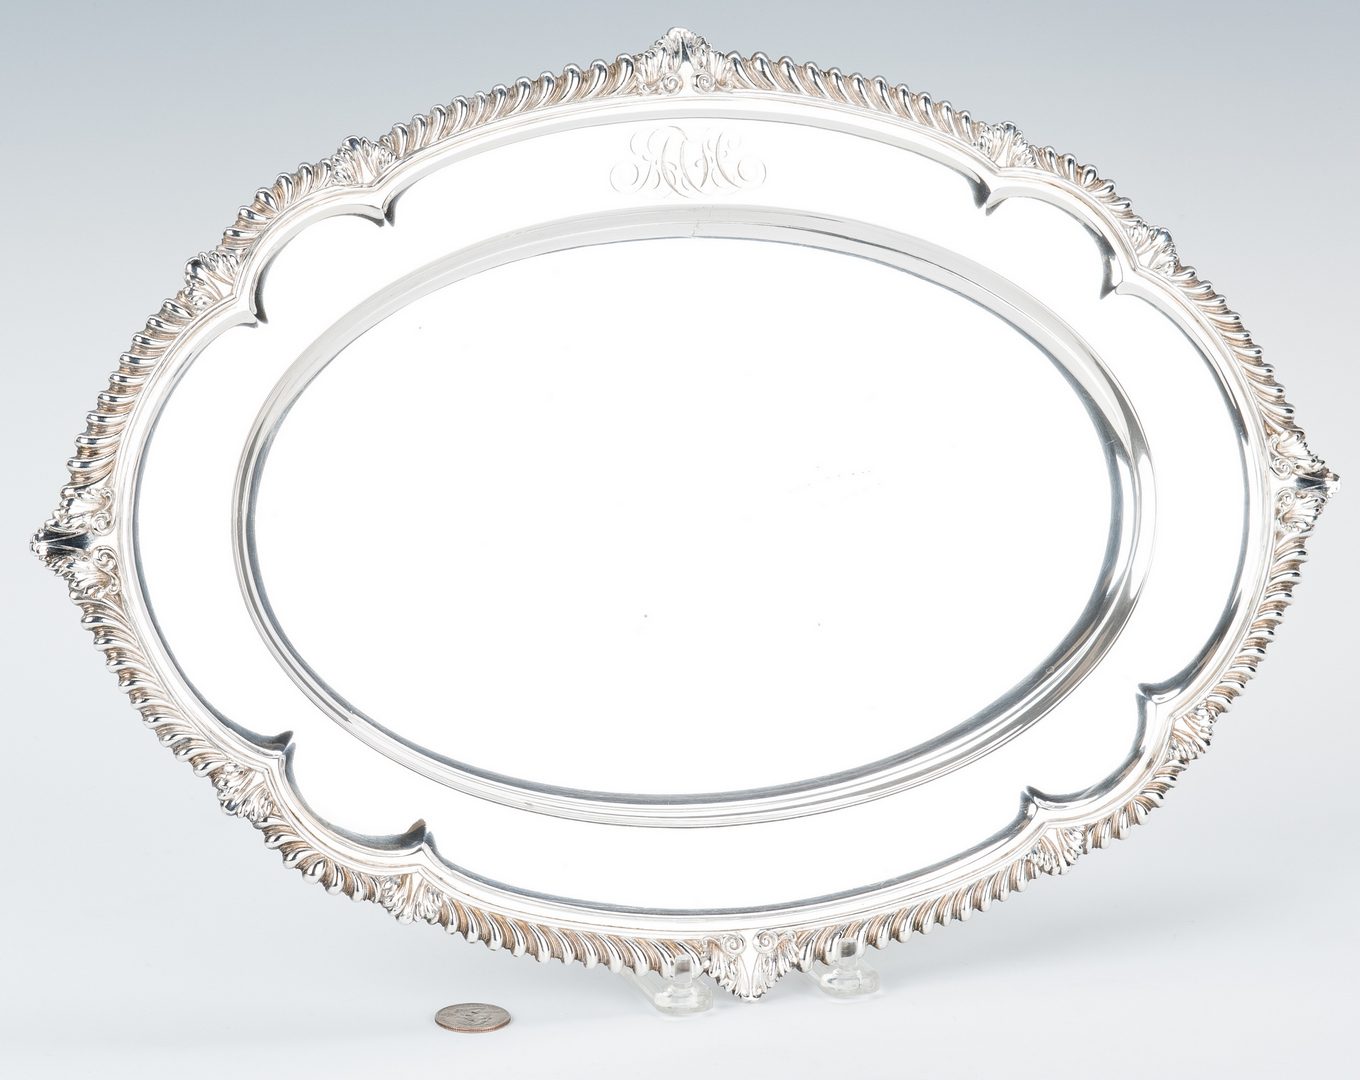 Lot 424: Gorham 16" Sterling Silver Oval Tray